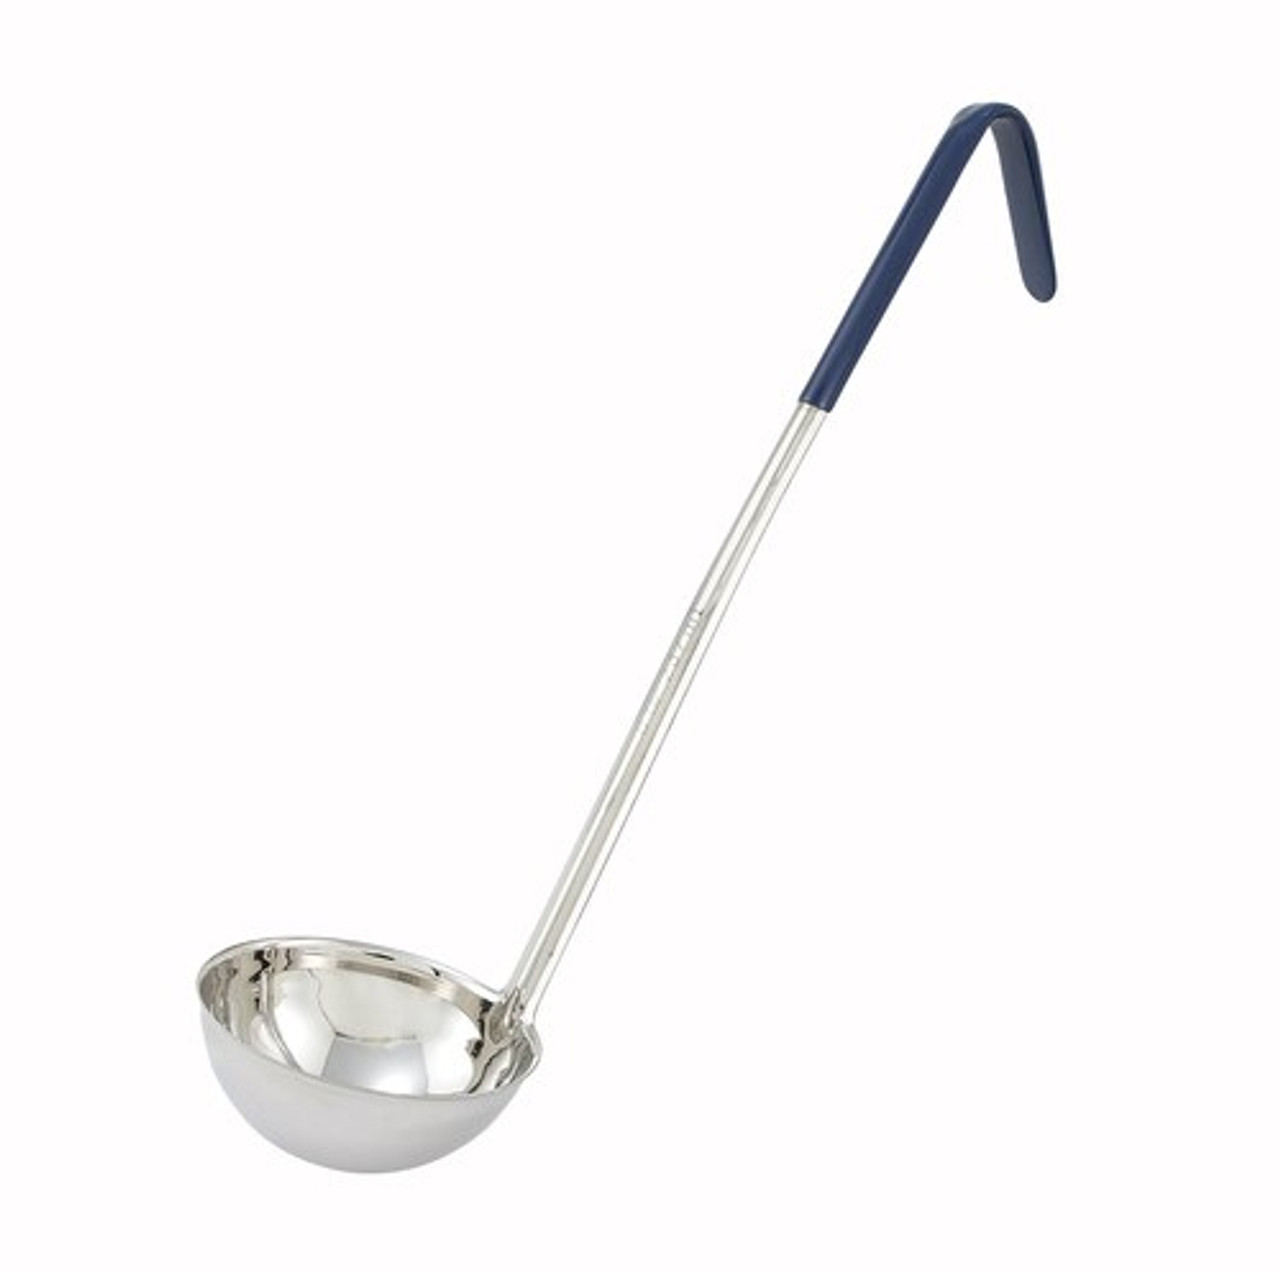 Color-Coded Ladle, 8 oz., 16-1/2" handle, one-piece, stainless steel, blue